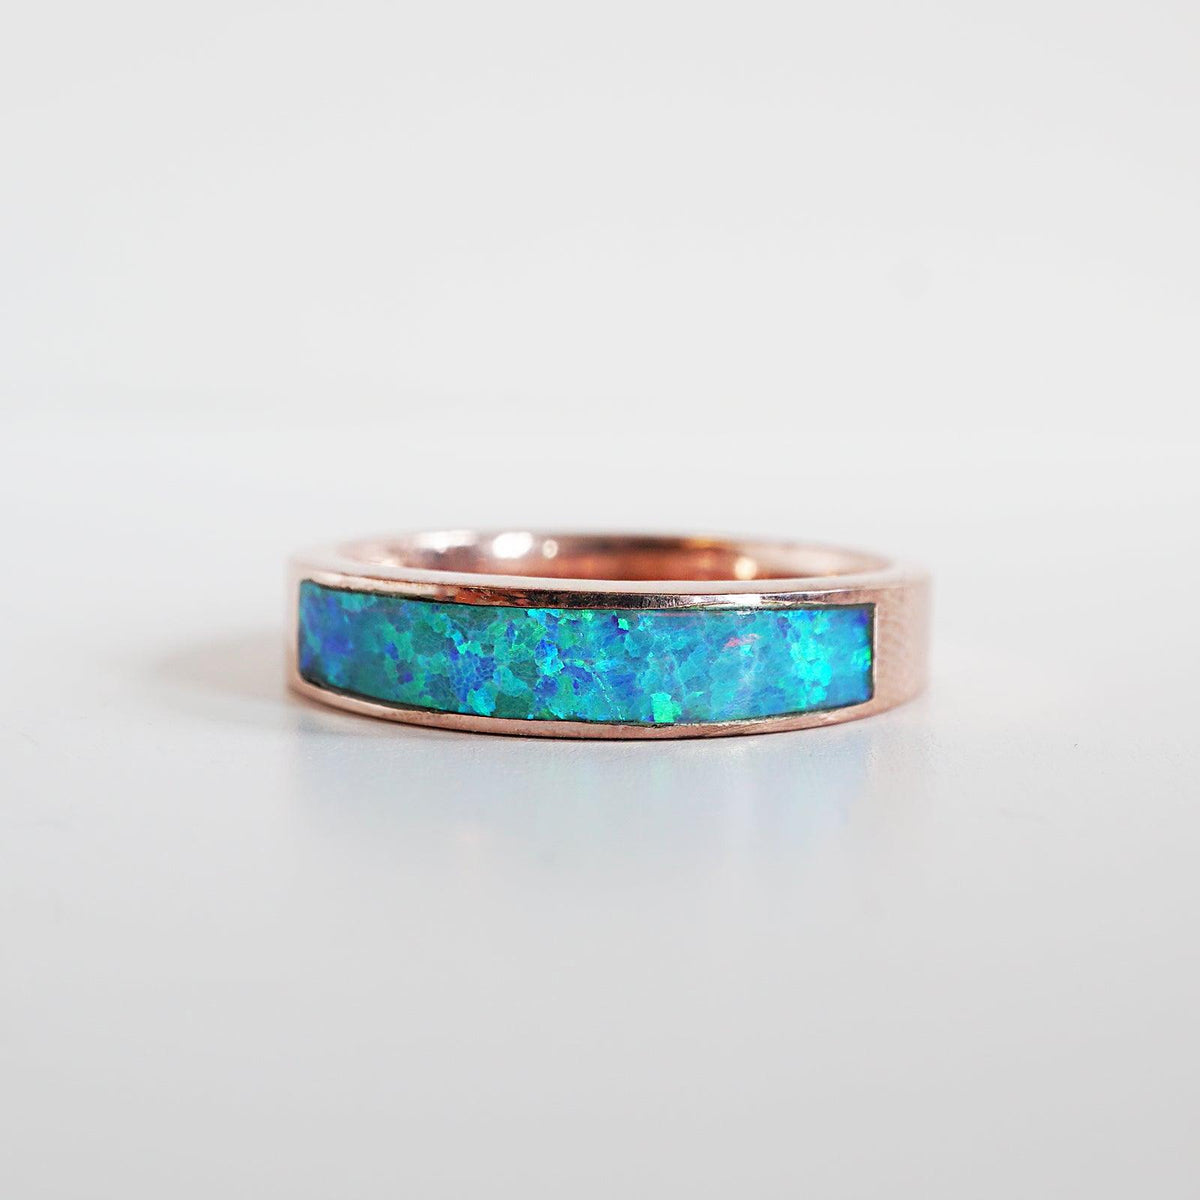 Opal Ring Band in Sterling Silver and 14K Gold, 3.5mm